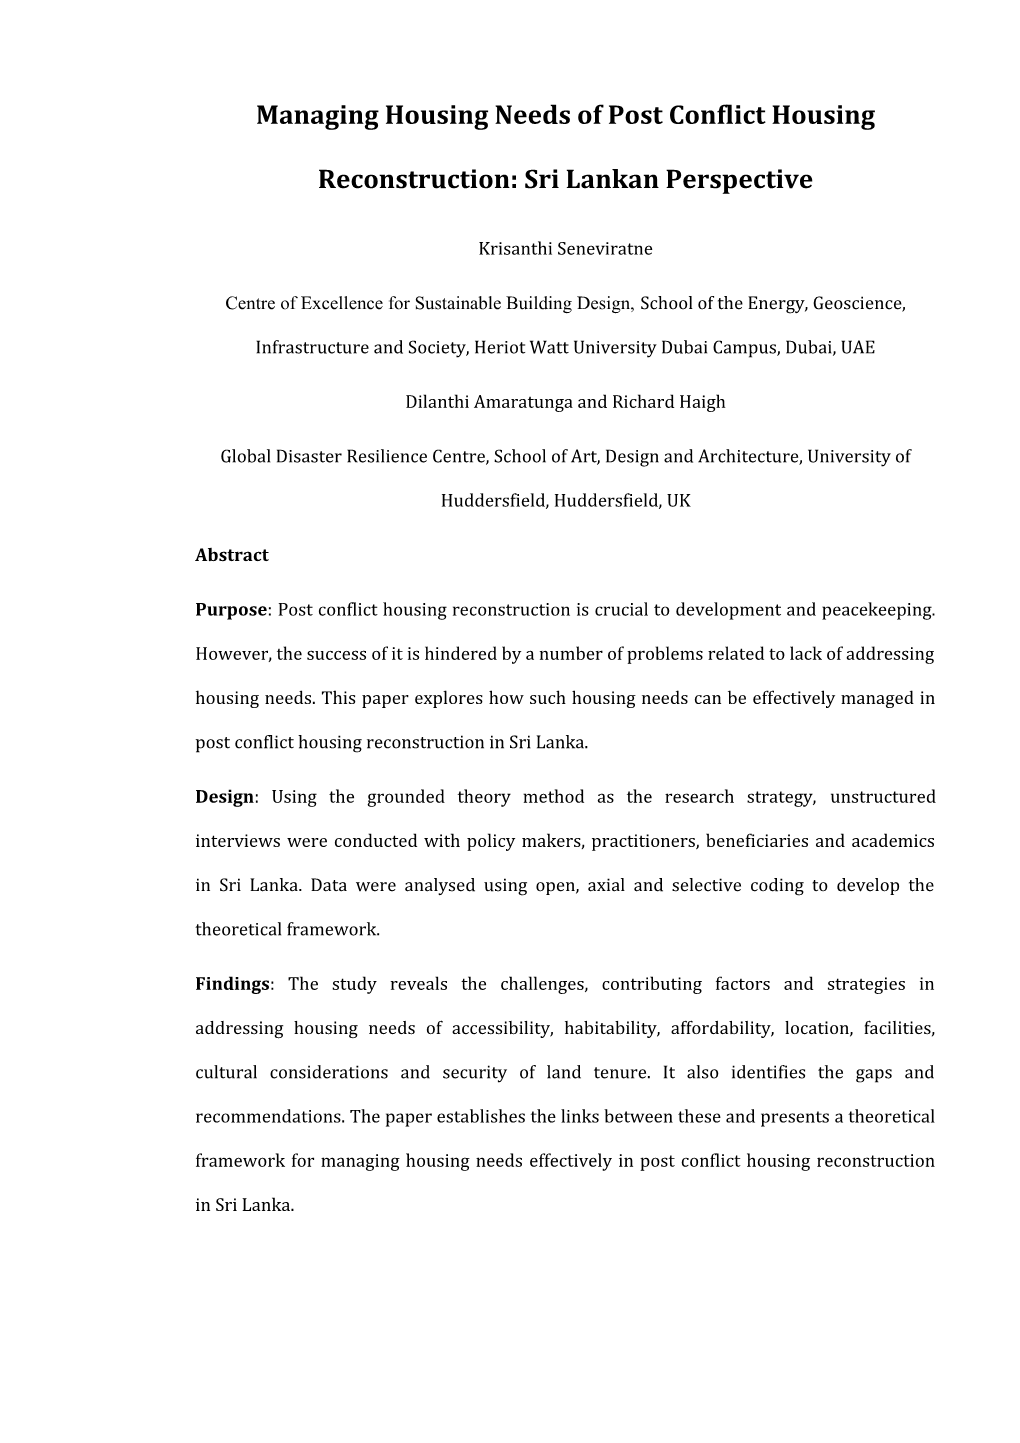 Managing Housing Needs Ofpost Conflict Housing Reconstruction: Sri Lankan Perspective